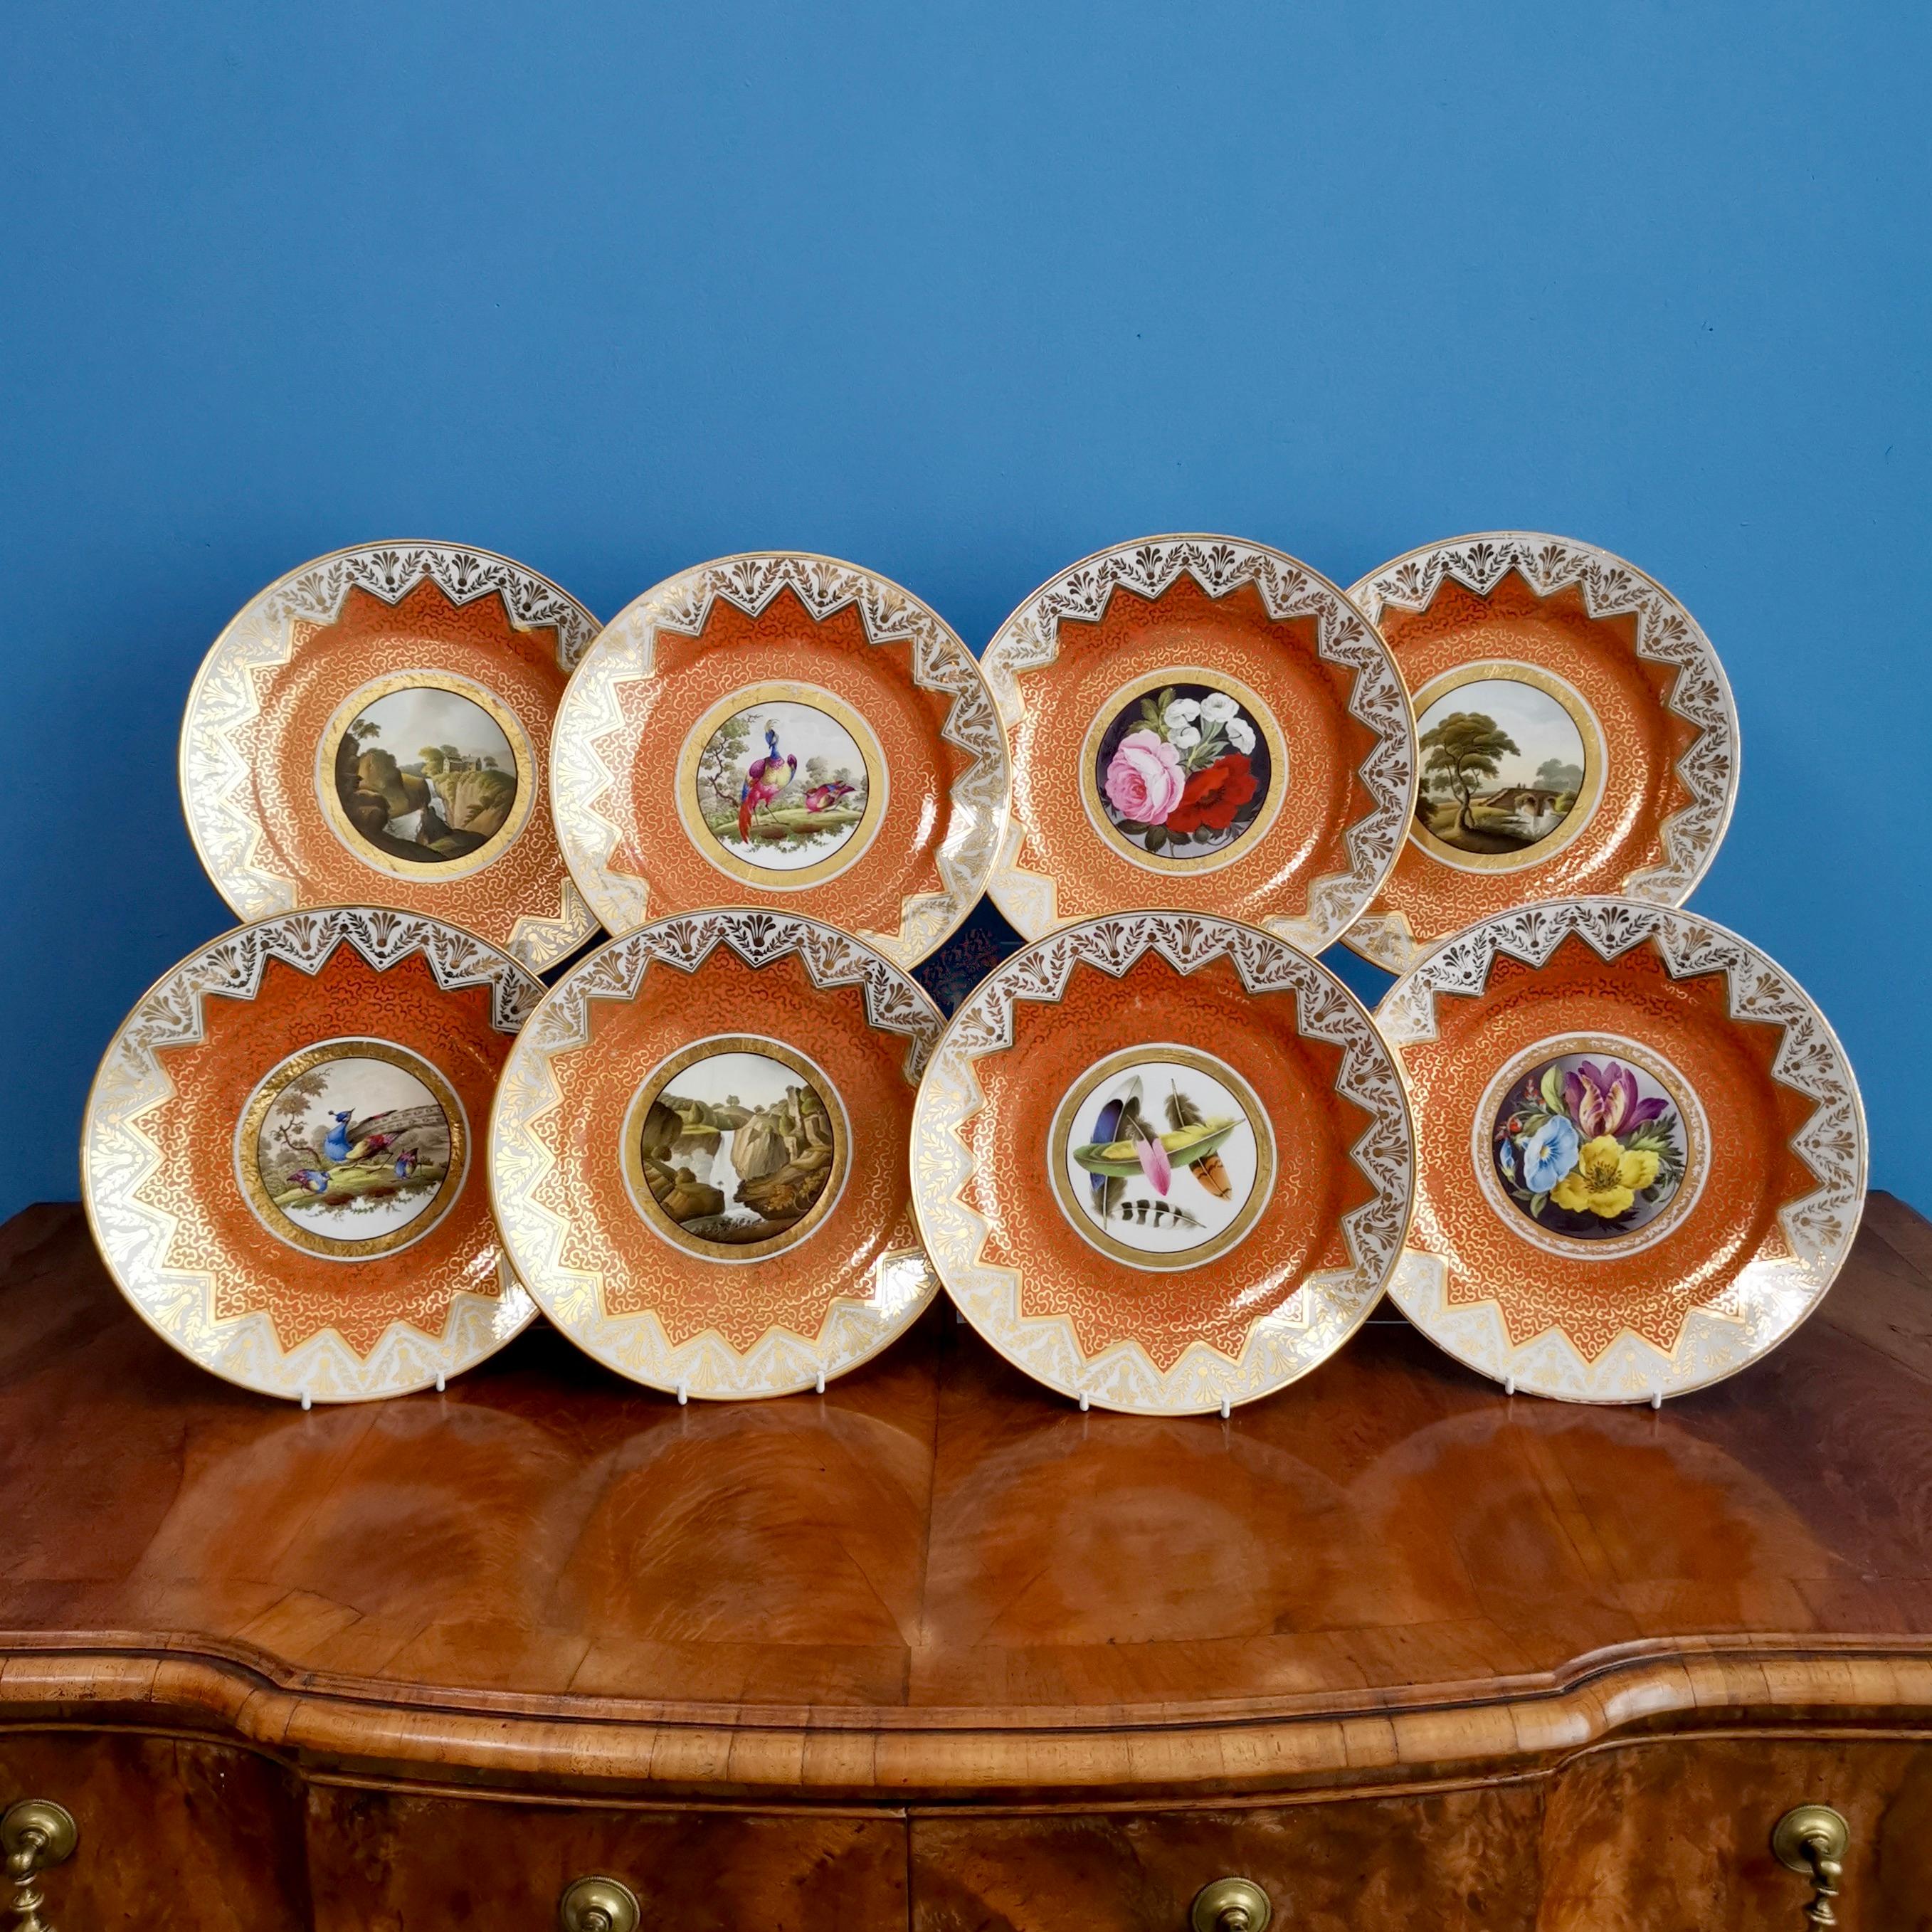 This is a stunning set of 8 dessert plates made by Chamberlains Worcester in about 1815. The plates are decorated with a deep orange ground with 